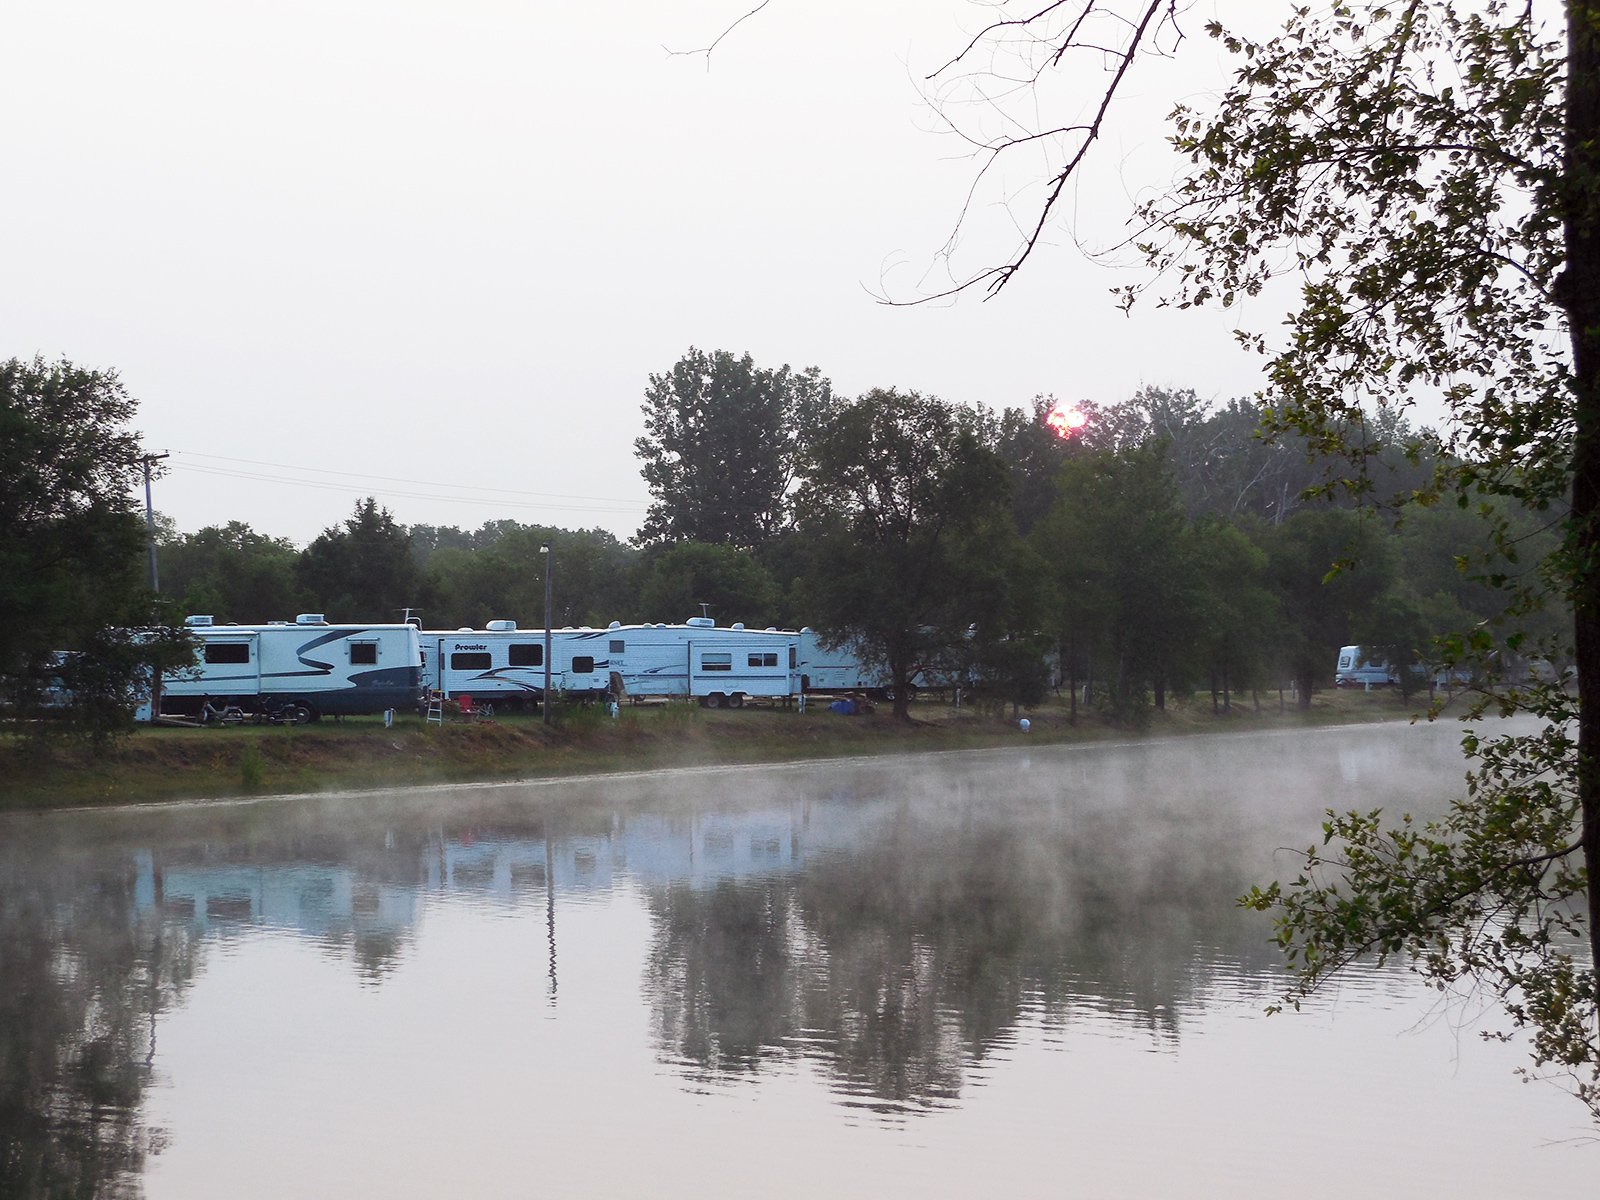 RVs parked at Leisure Lake Campground.